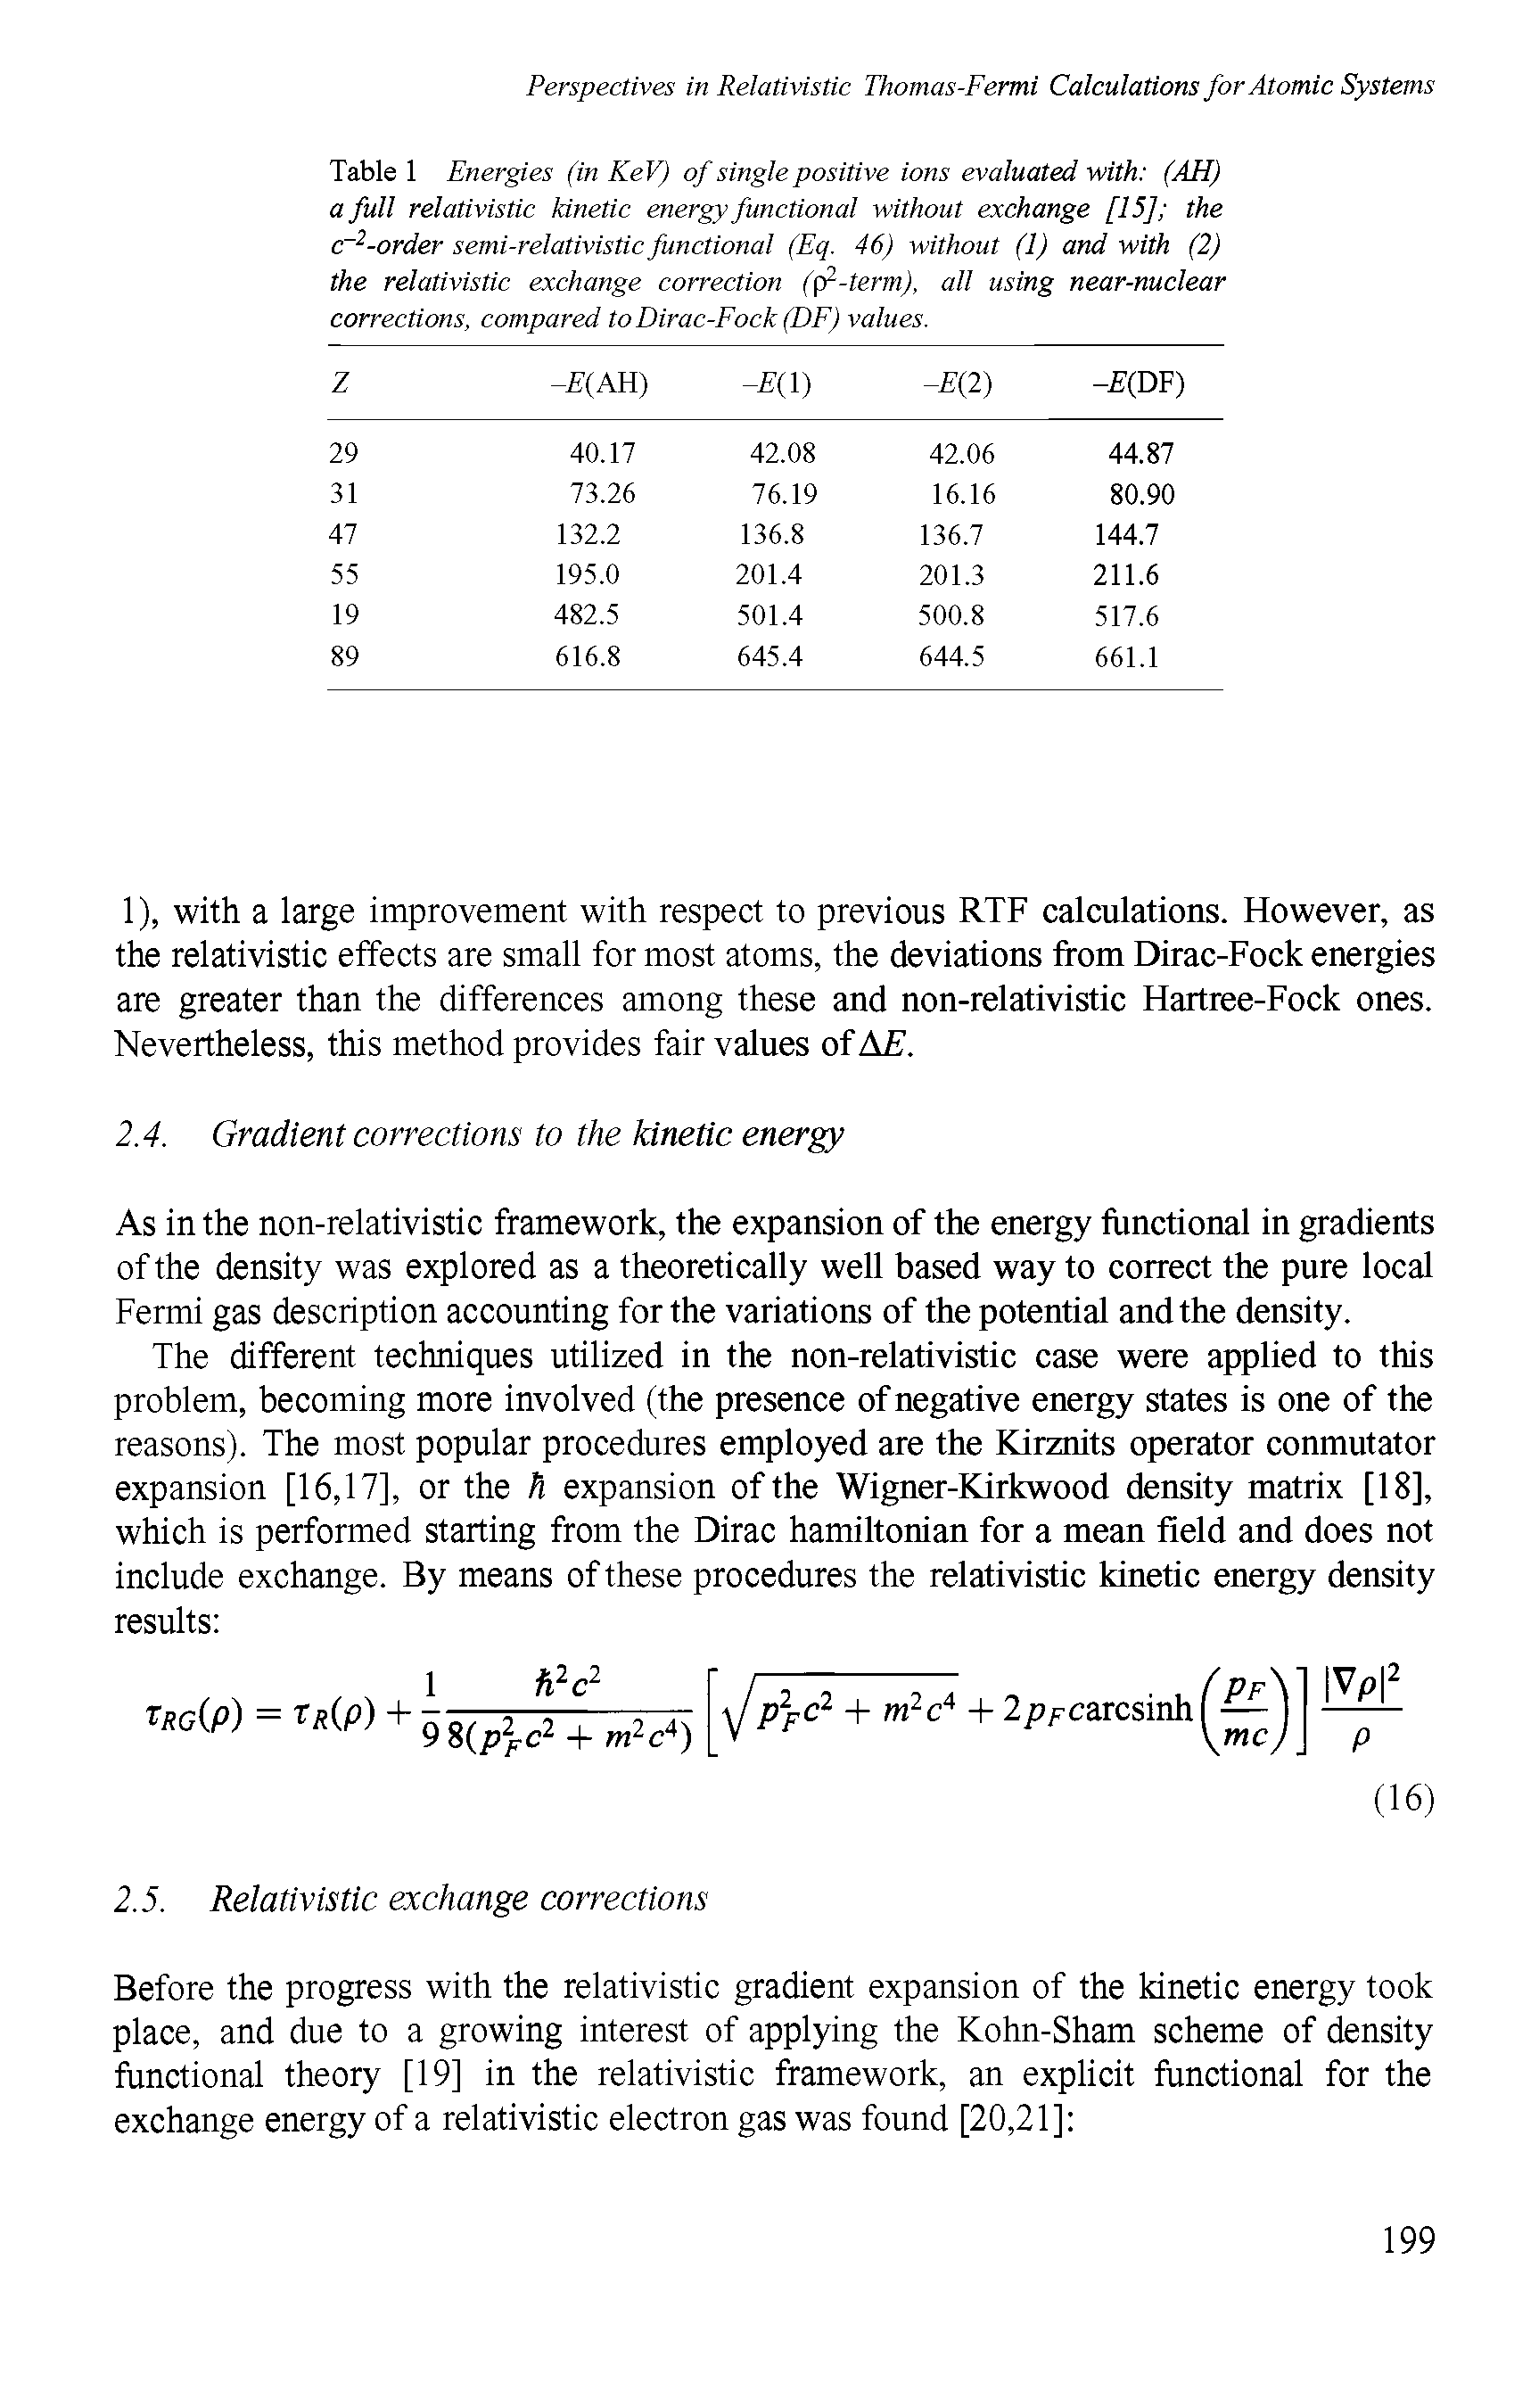 Table 1 Energies (in KeV) of single positive ions evaluated with (AH) a full relativistic kinetic energy functional without exchange [15] the c -order semi-relativistic functional (Eq. 46) without (1) and with (2) the relativistic exchange correction ((f-term), all using near-nuclear corrections, compared to Dirac-Fock (DF) values.